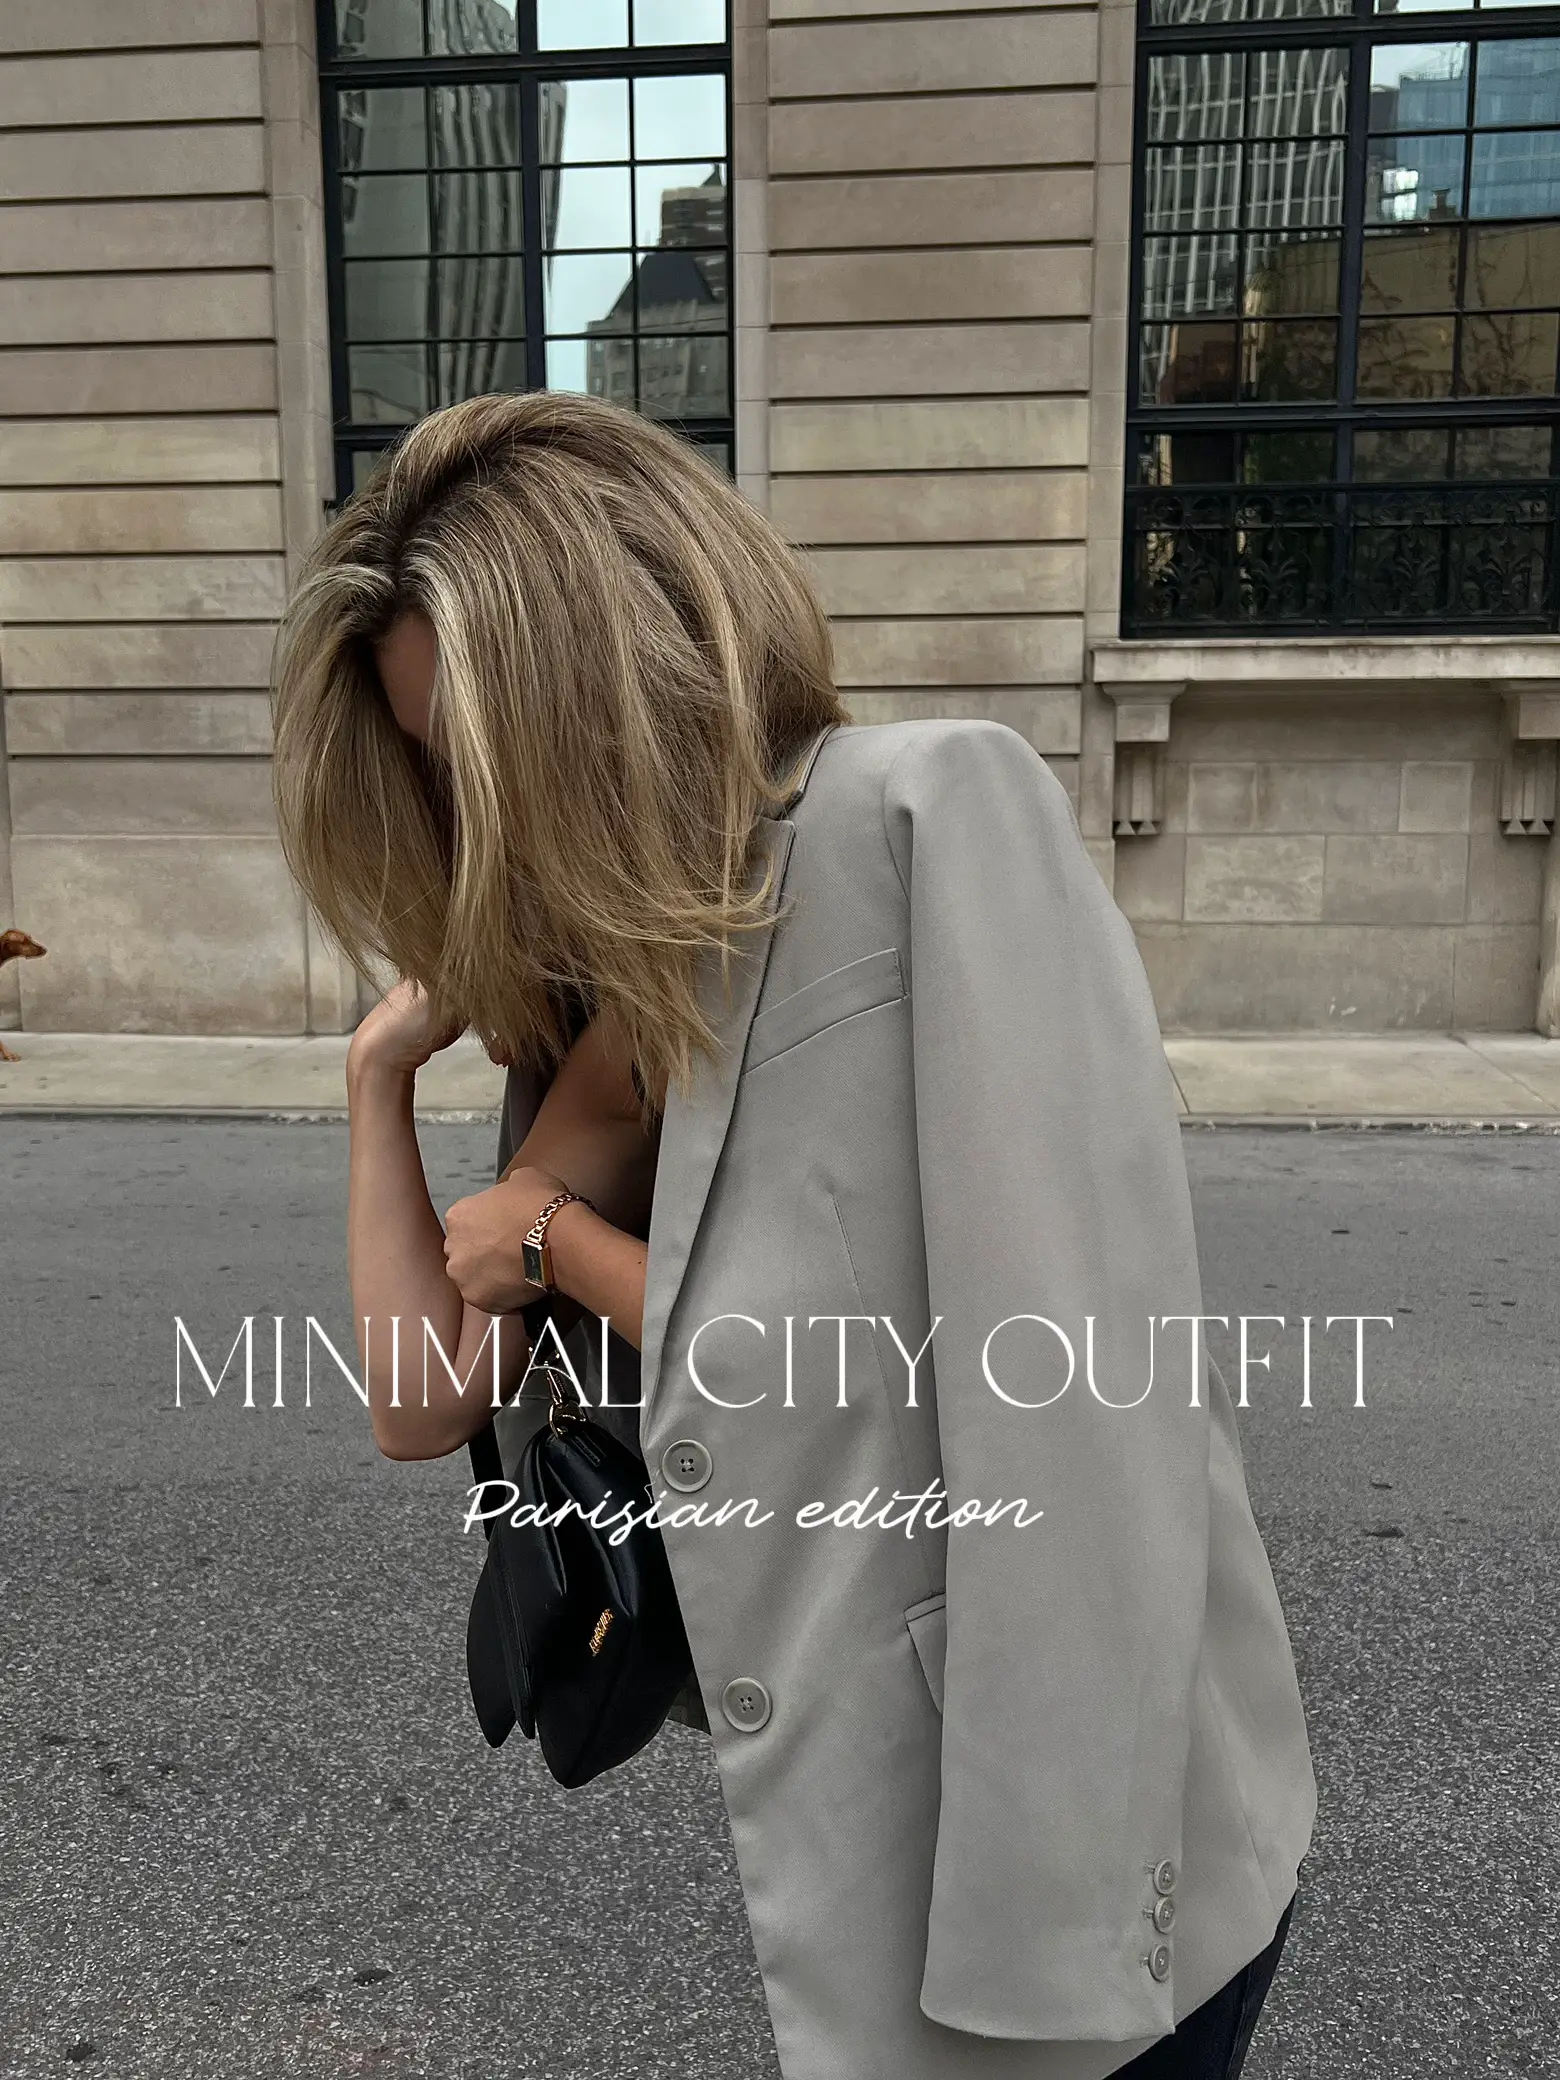 City minimalistic outfit inspo 's images